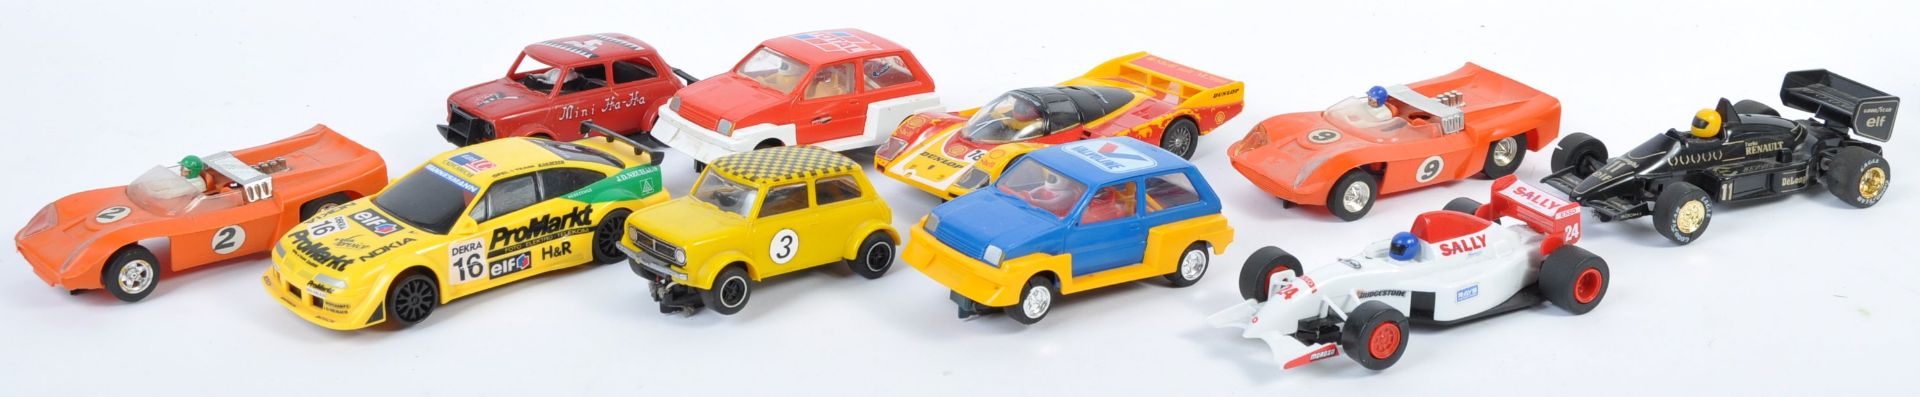 COLLECTION OF ASSORTED VINTAGE SCALEXTRIC SLOT RAC